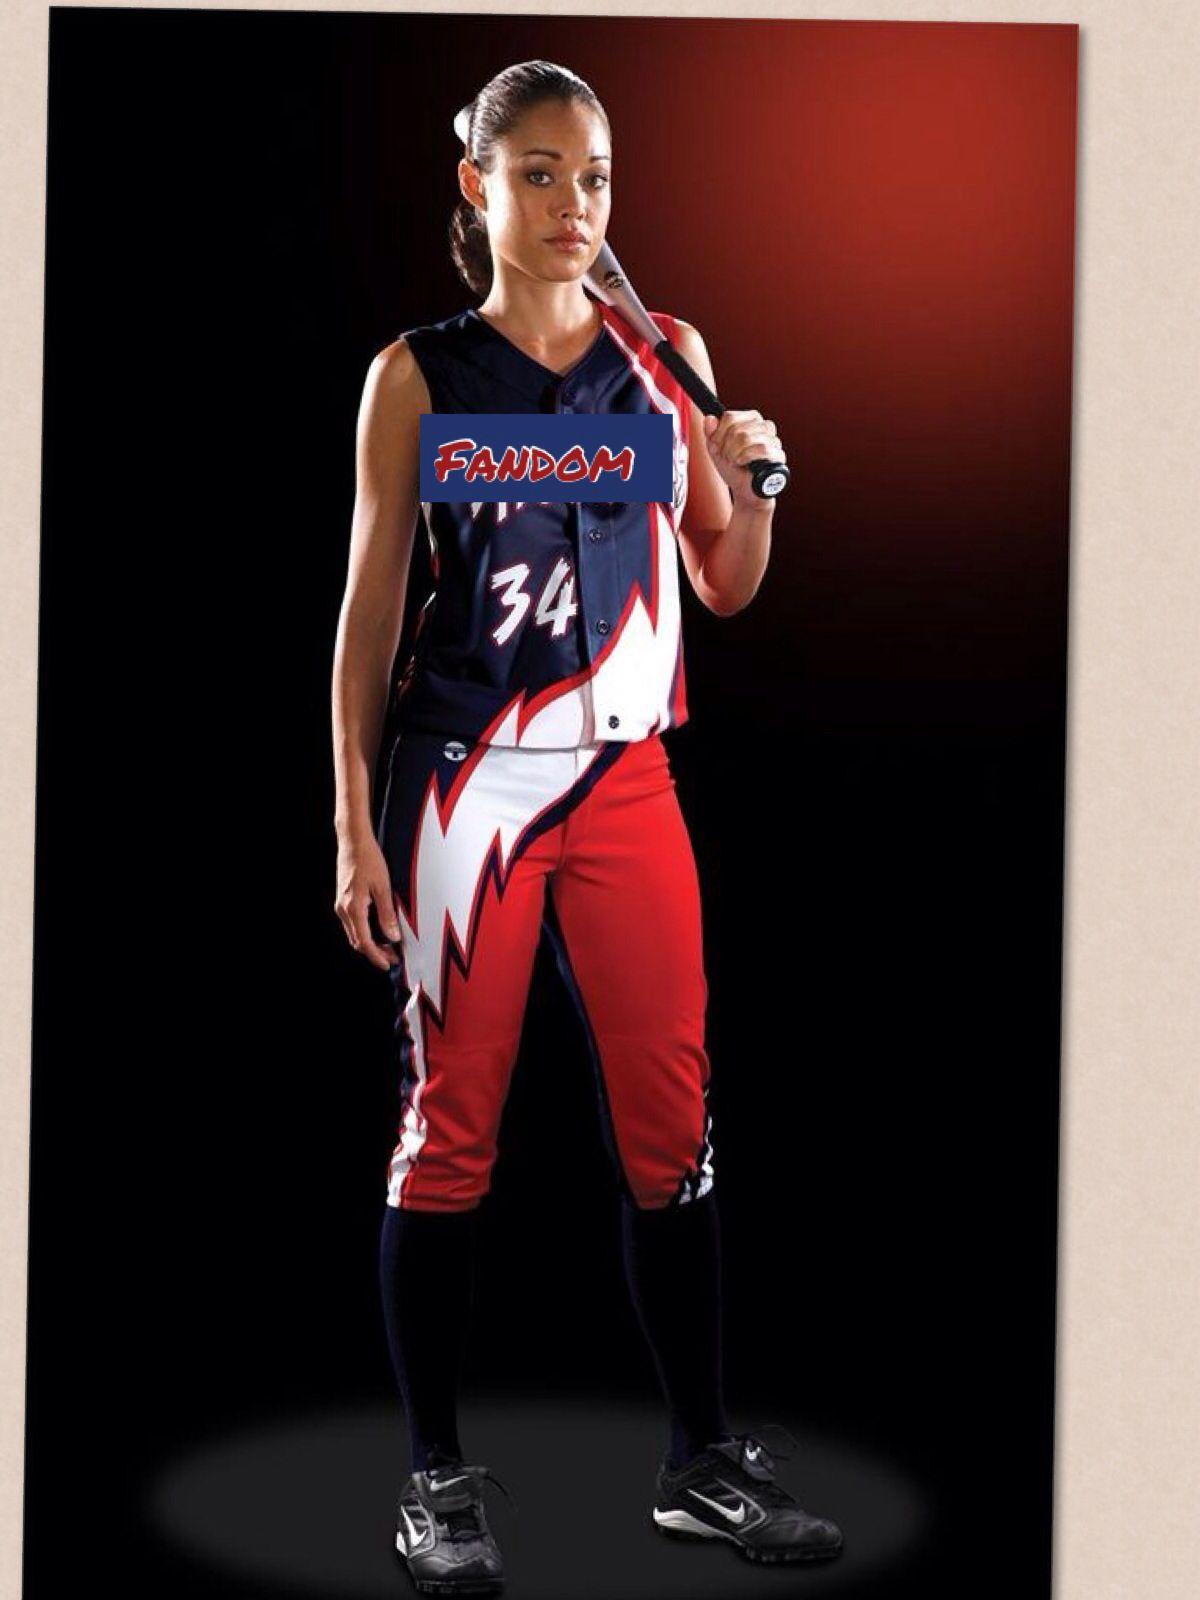 Red Blue and White Softball Logo - Our official school colors are red white and blue!! Here is the ...